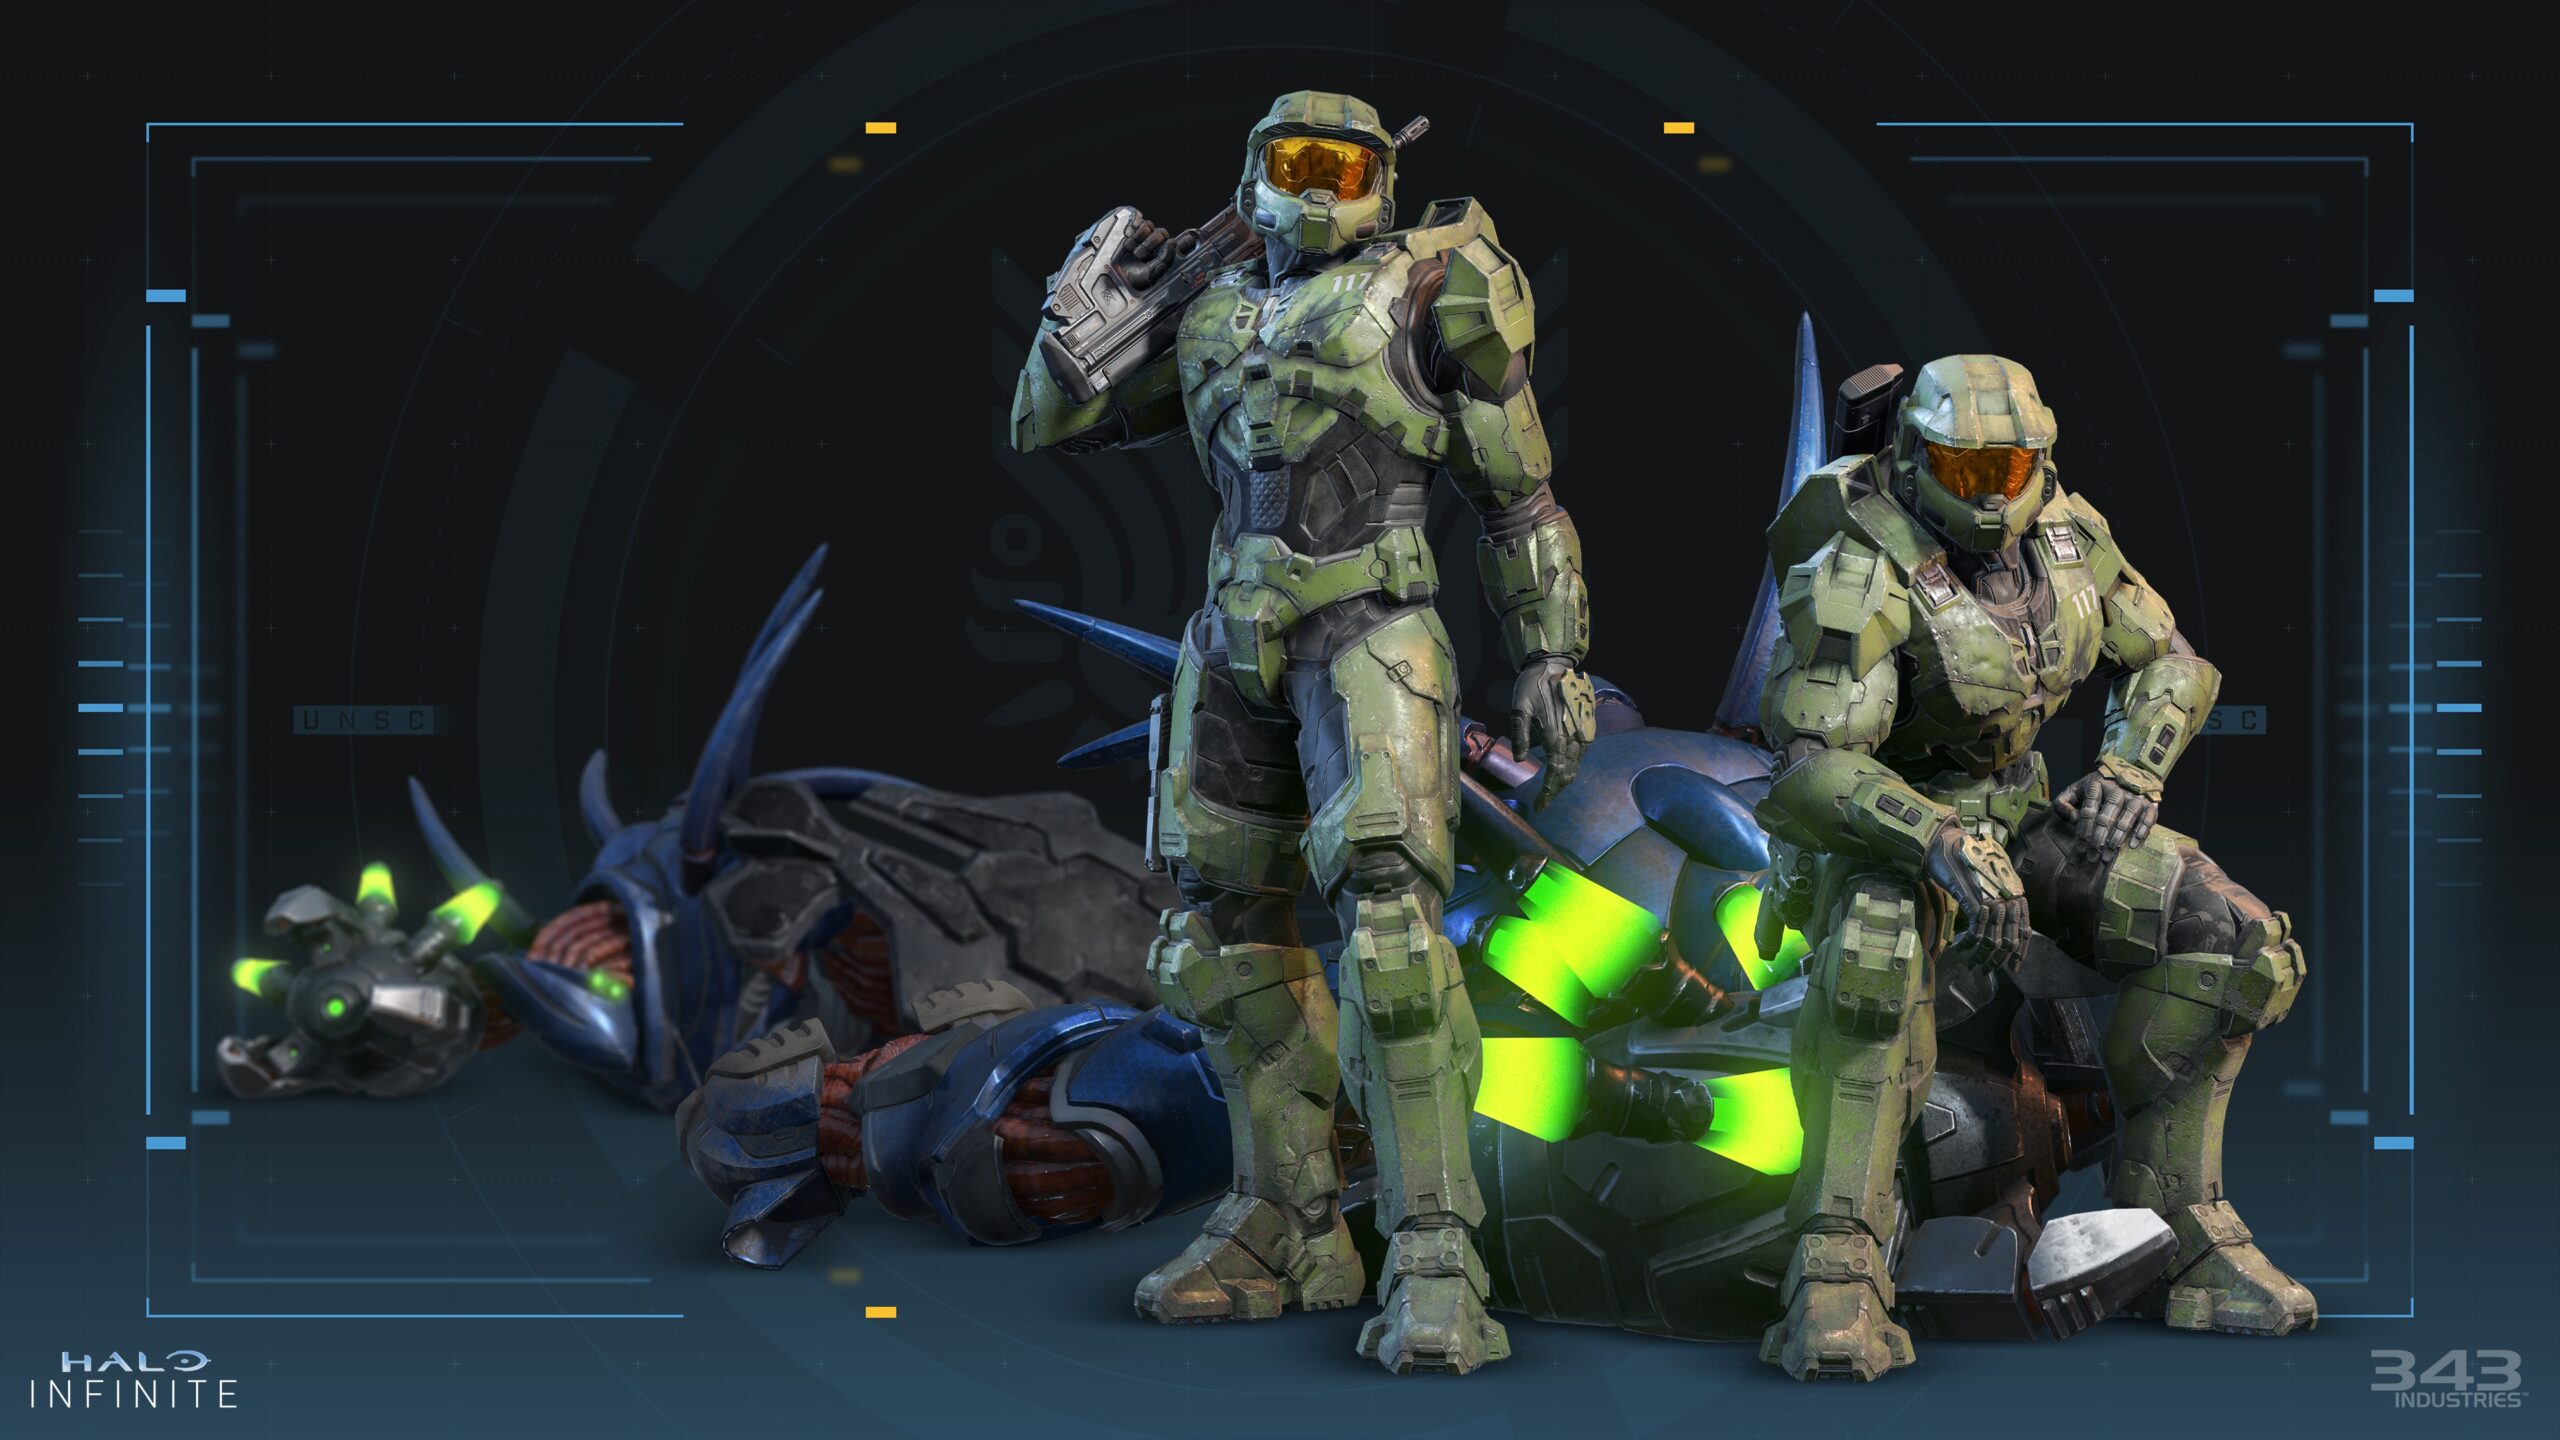 Campaign Co-Op Achievement image of two Master Chiefs, one sitting on a fallen Hunter